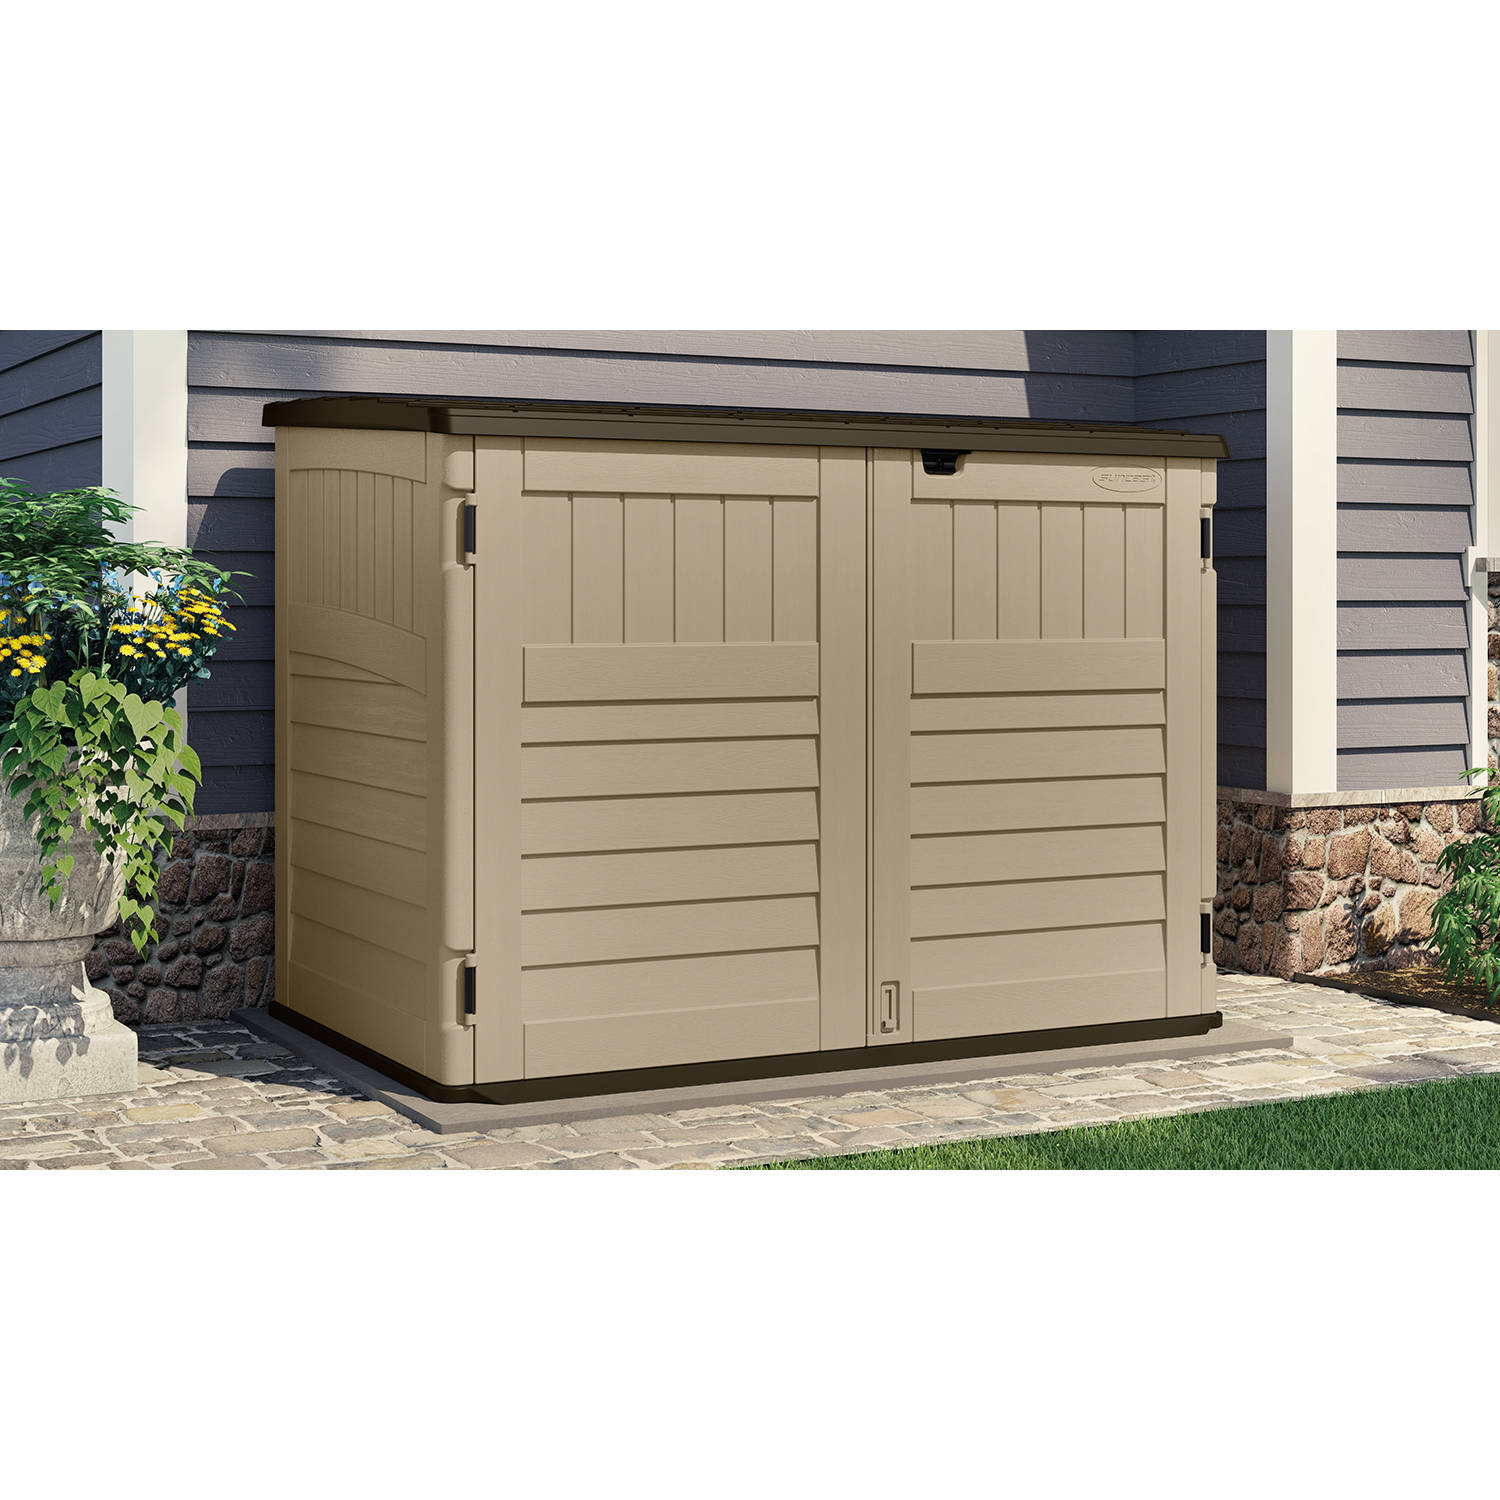 Rubbermaid 52 Cu Ft Vertical Shed Beige Walmart with regard to proportions 1500 X 1500